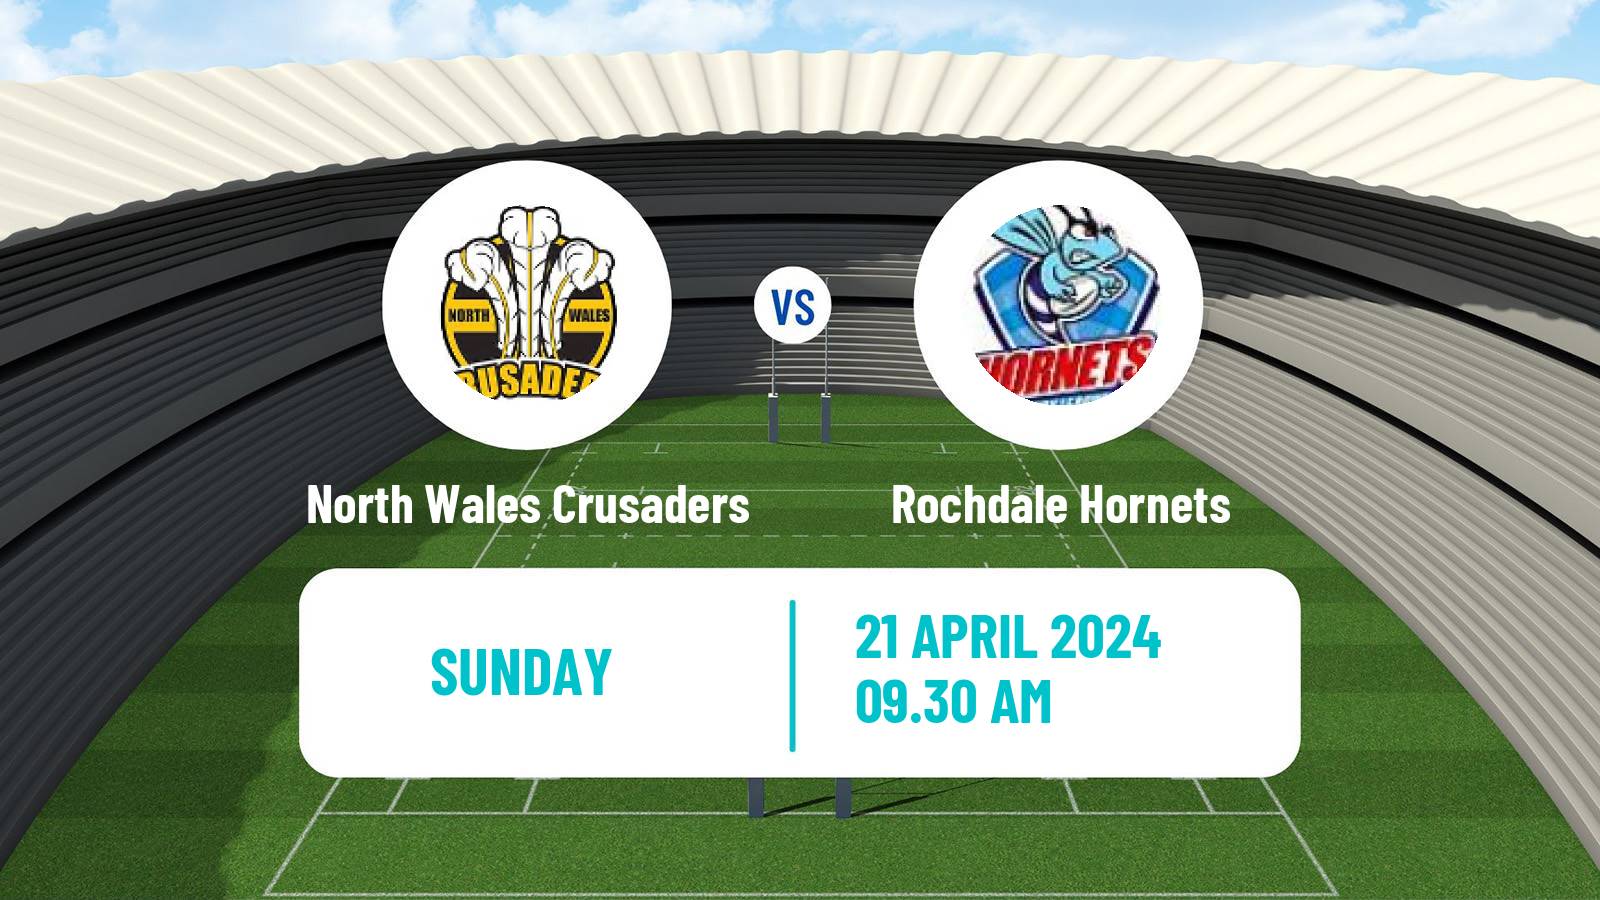 Rugby league English League 1 Rugby League North Wales Crusaders - Rochdale Hornets